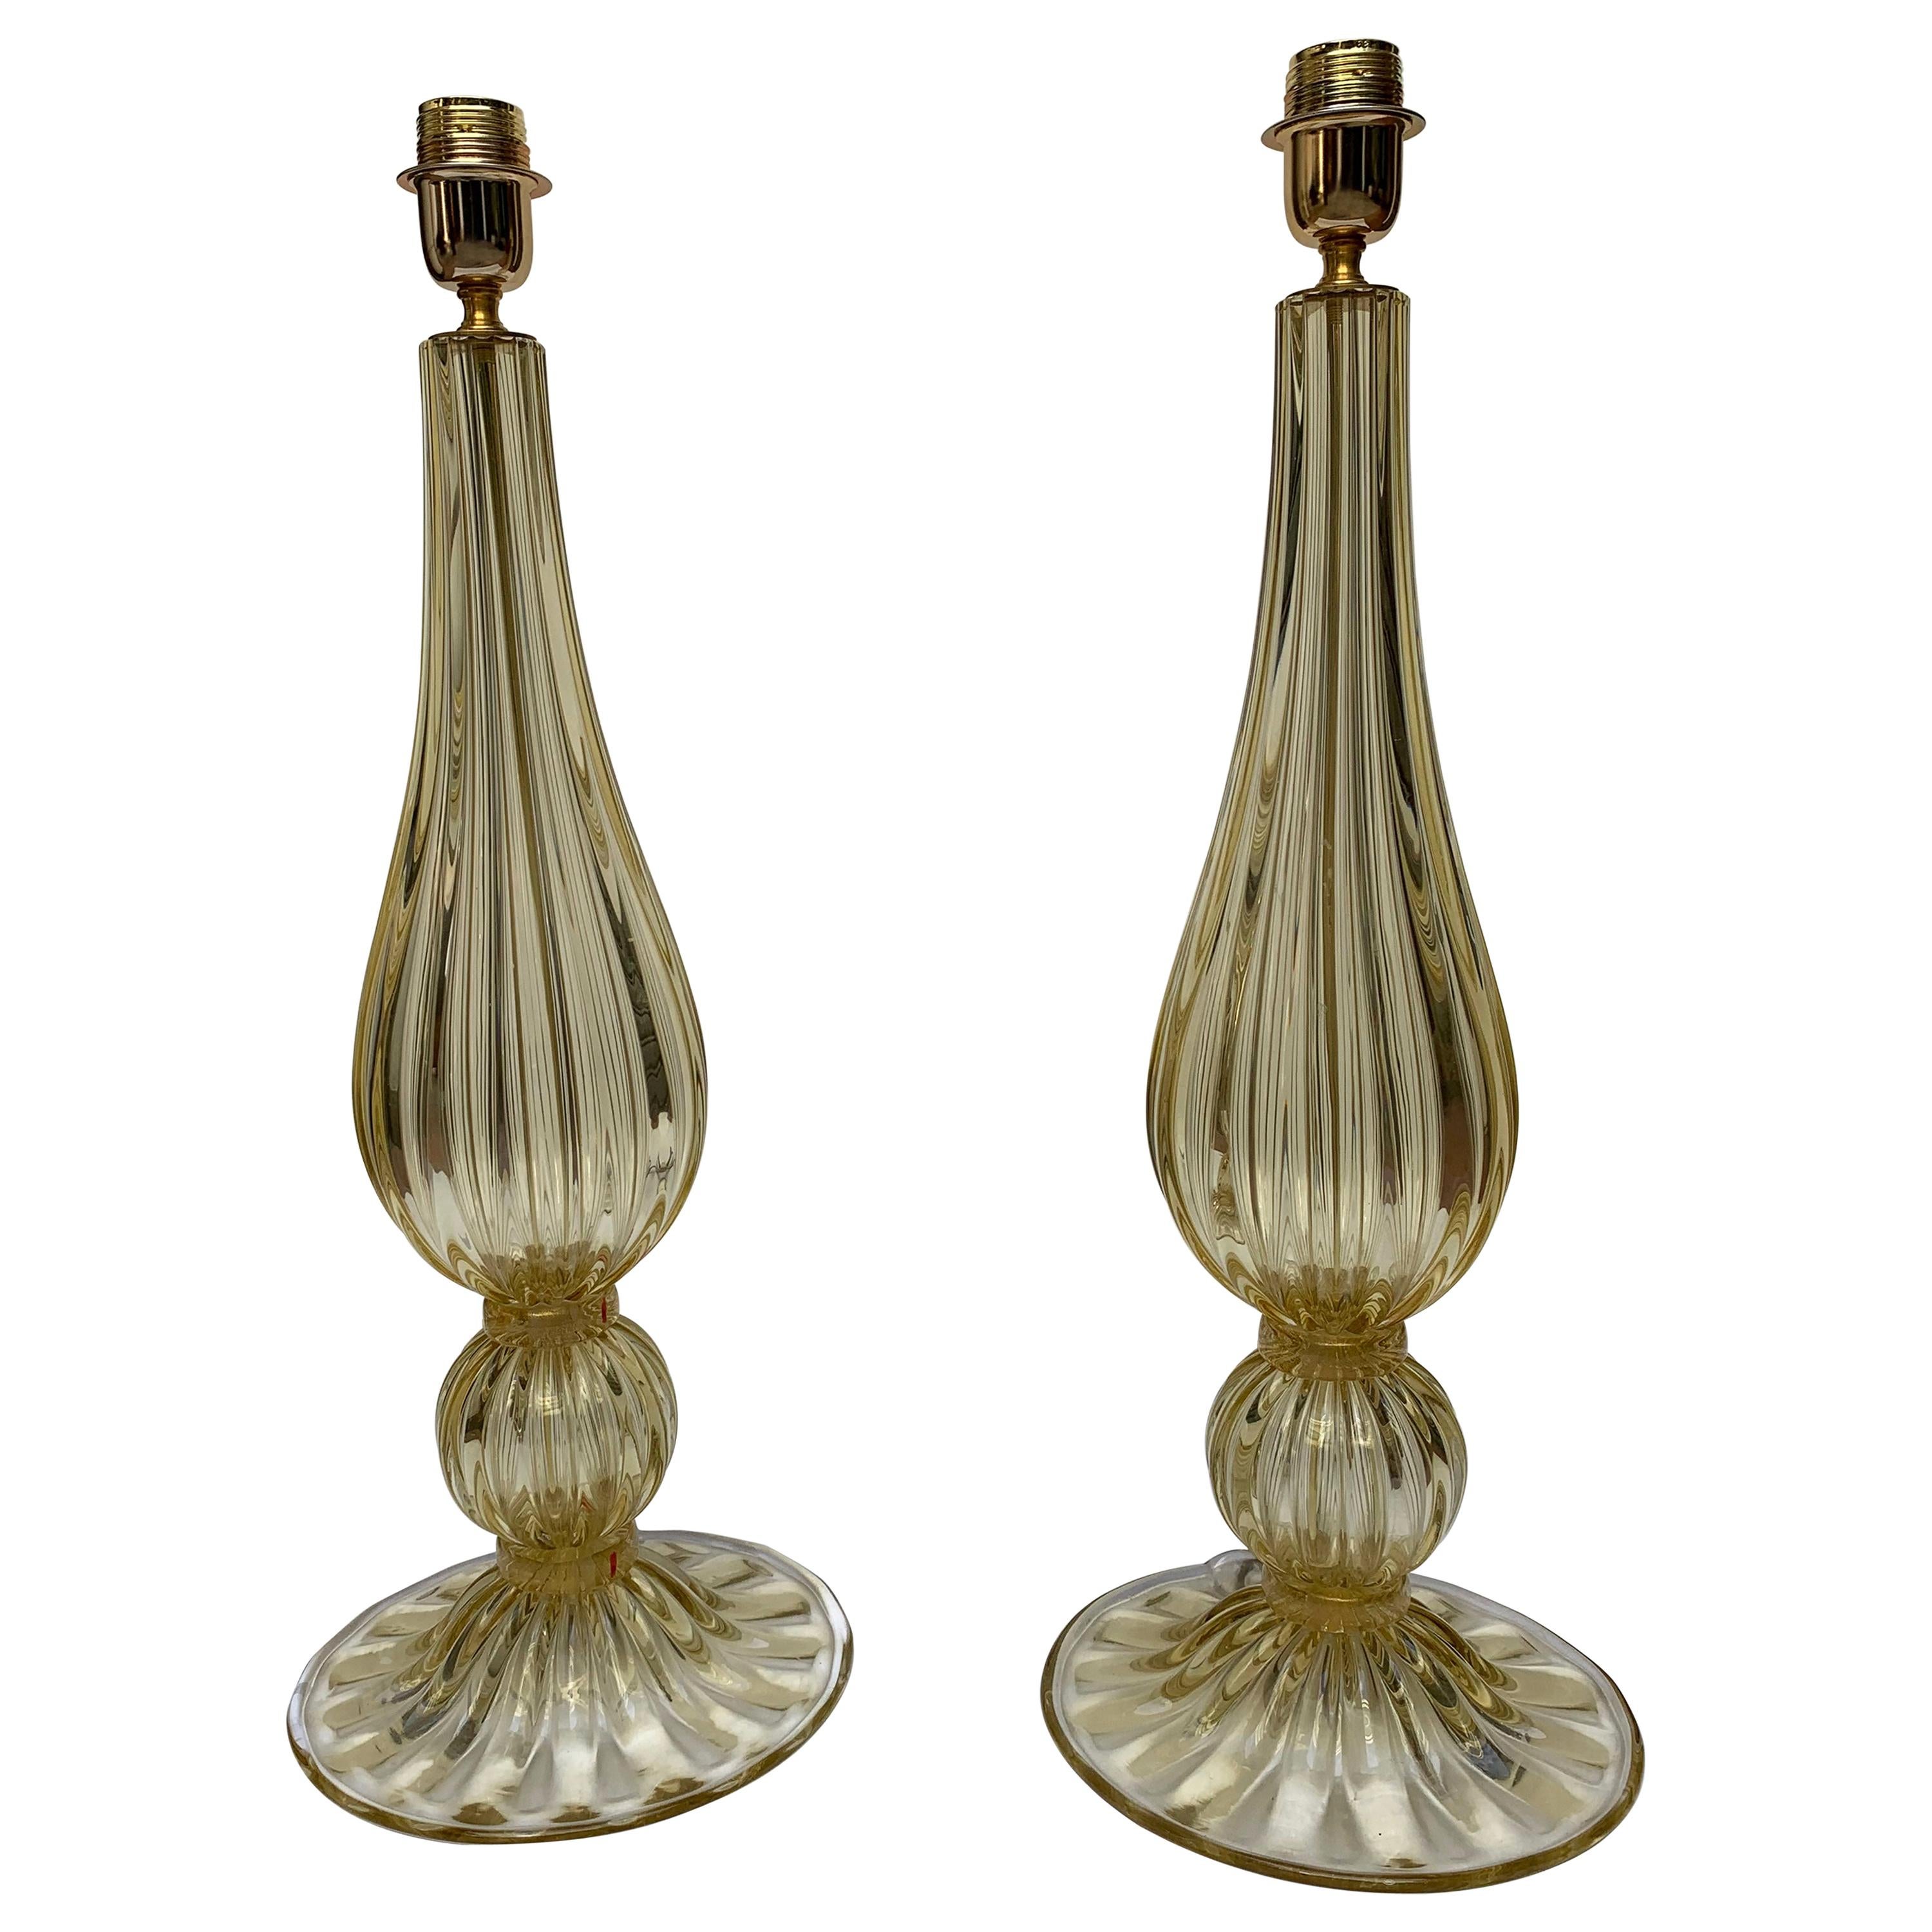 Pair of Table Lamps in Murano Glass Signed “Toso”